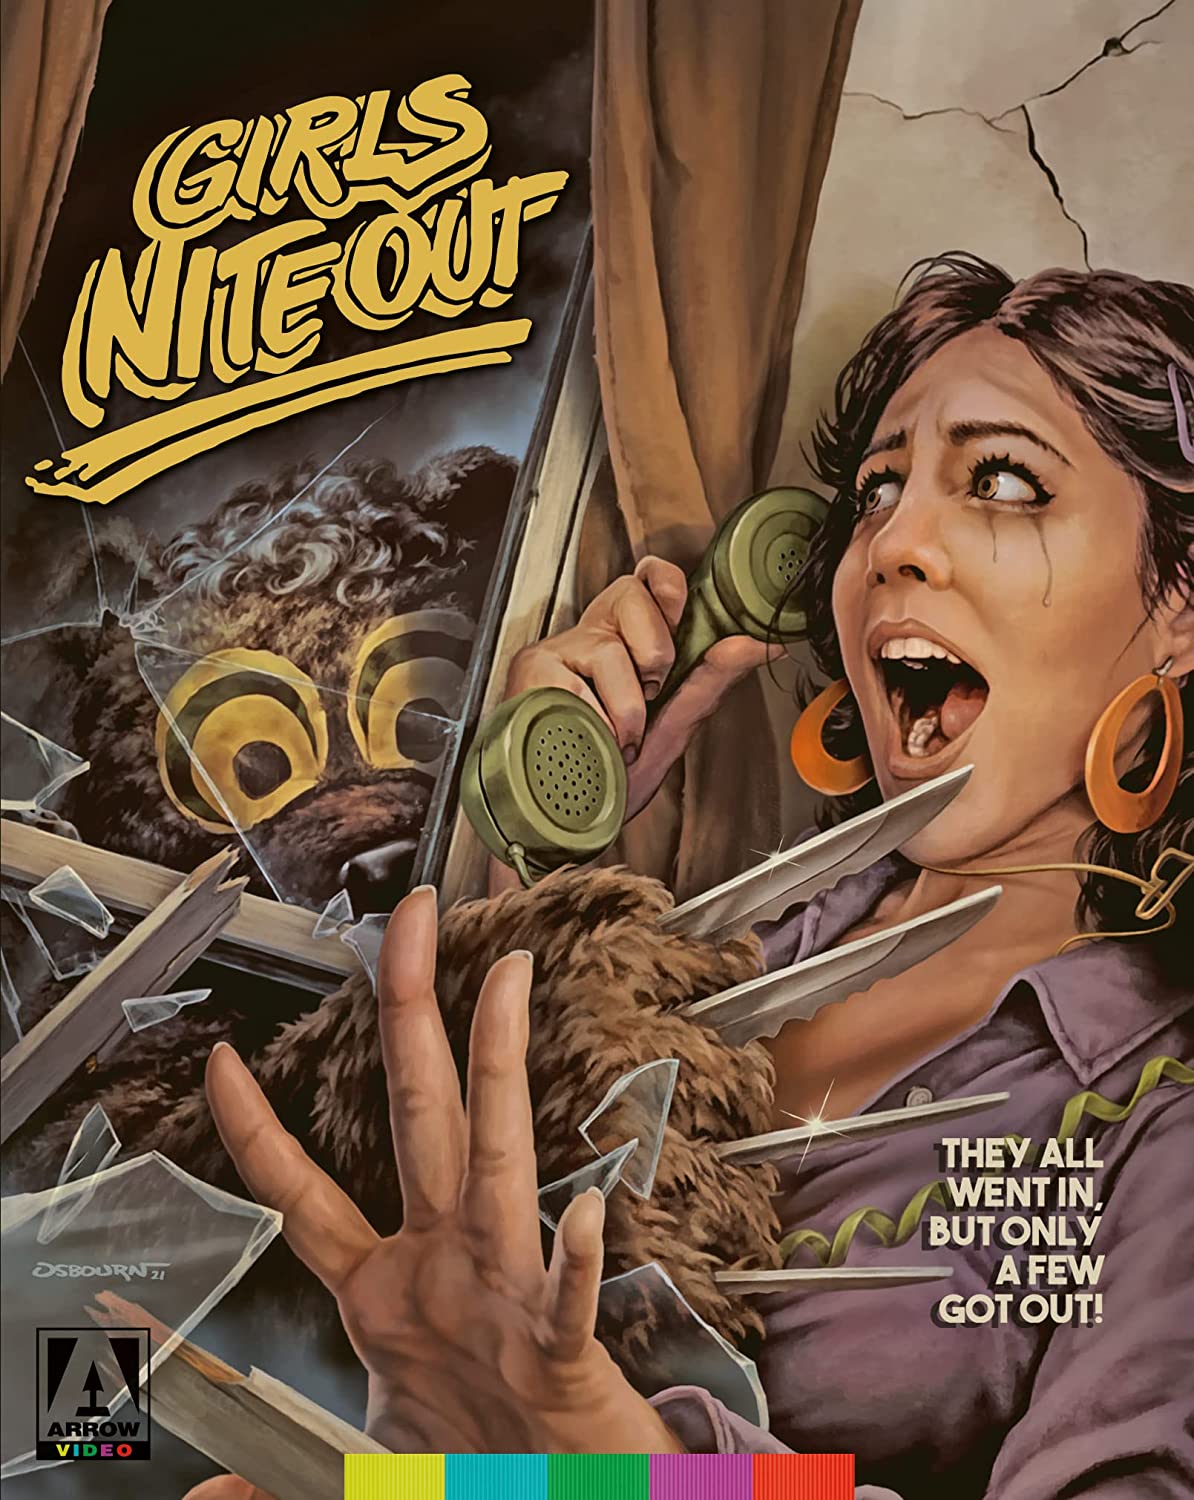 Girls Nite Out Blu-ray Review (Arrow Video) - Cultsploitation